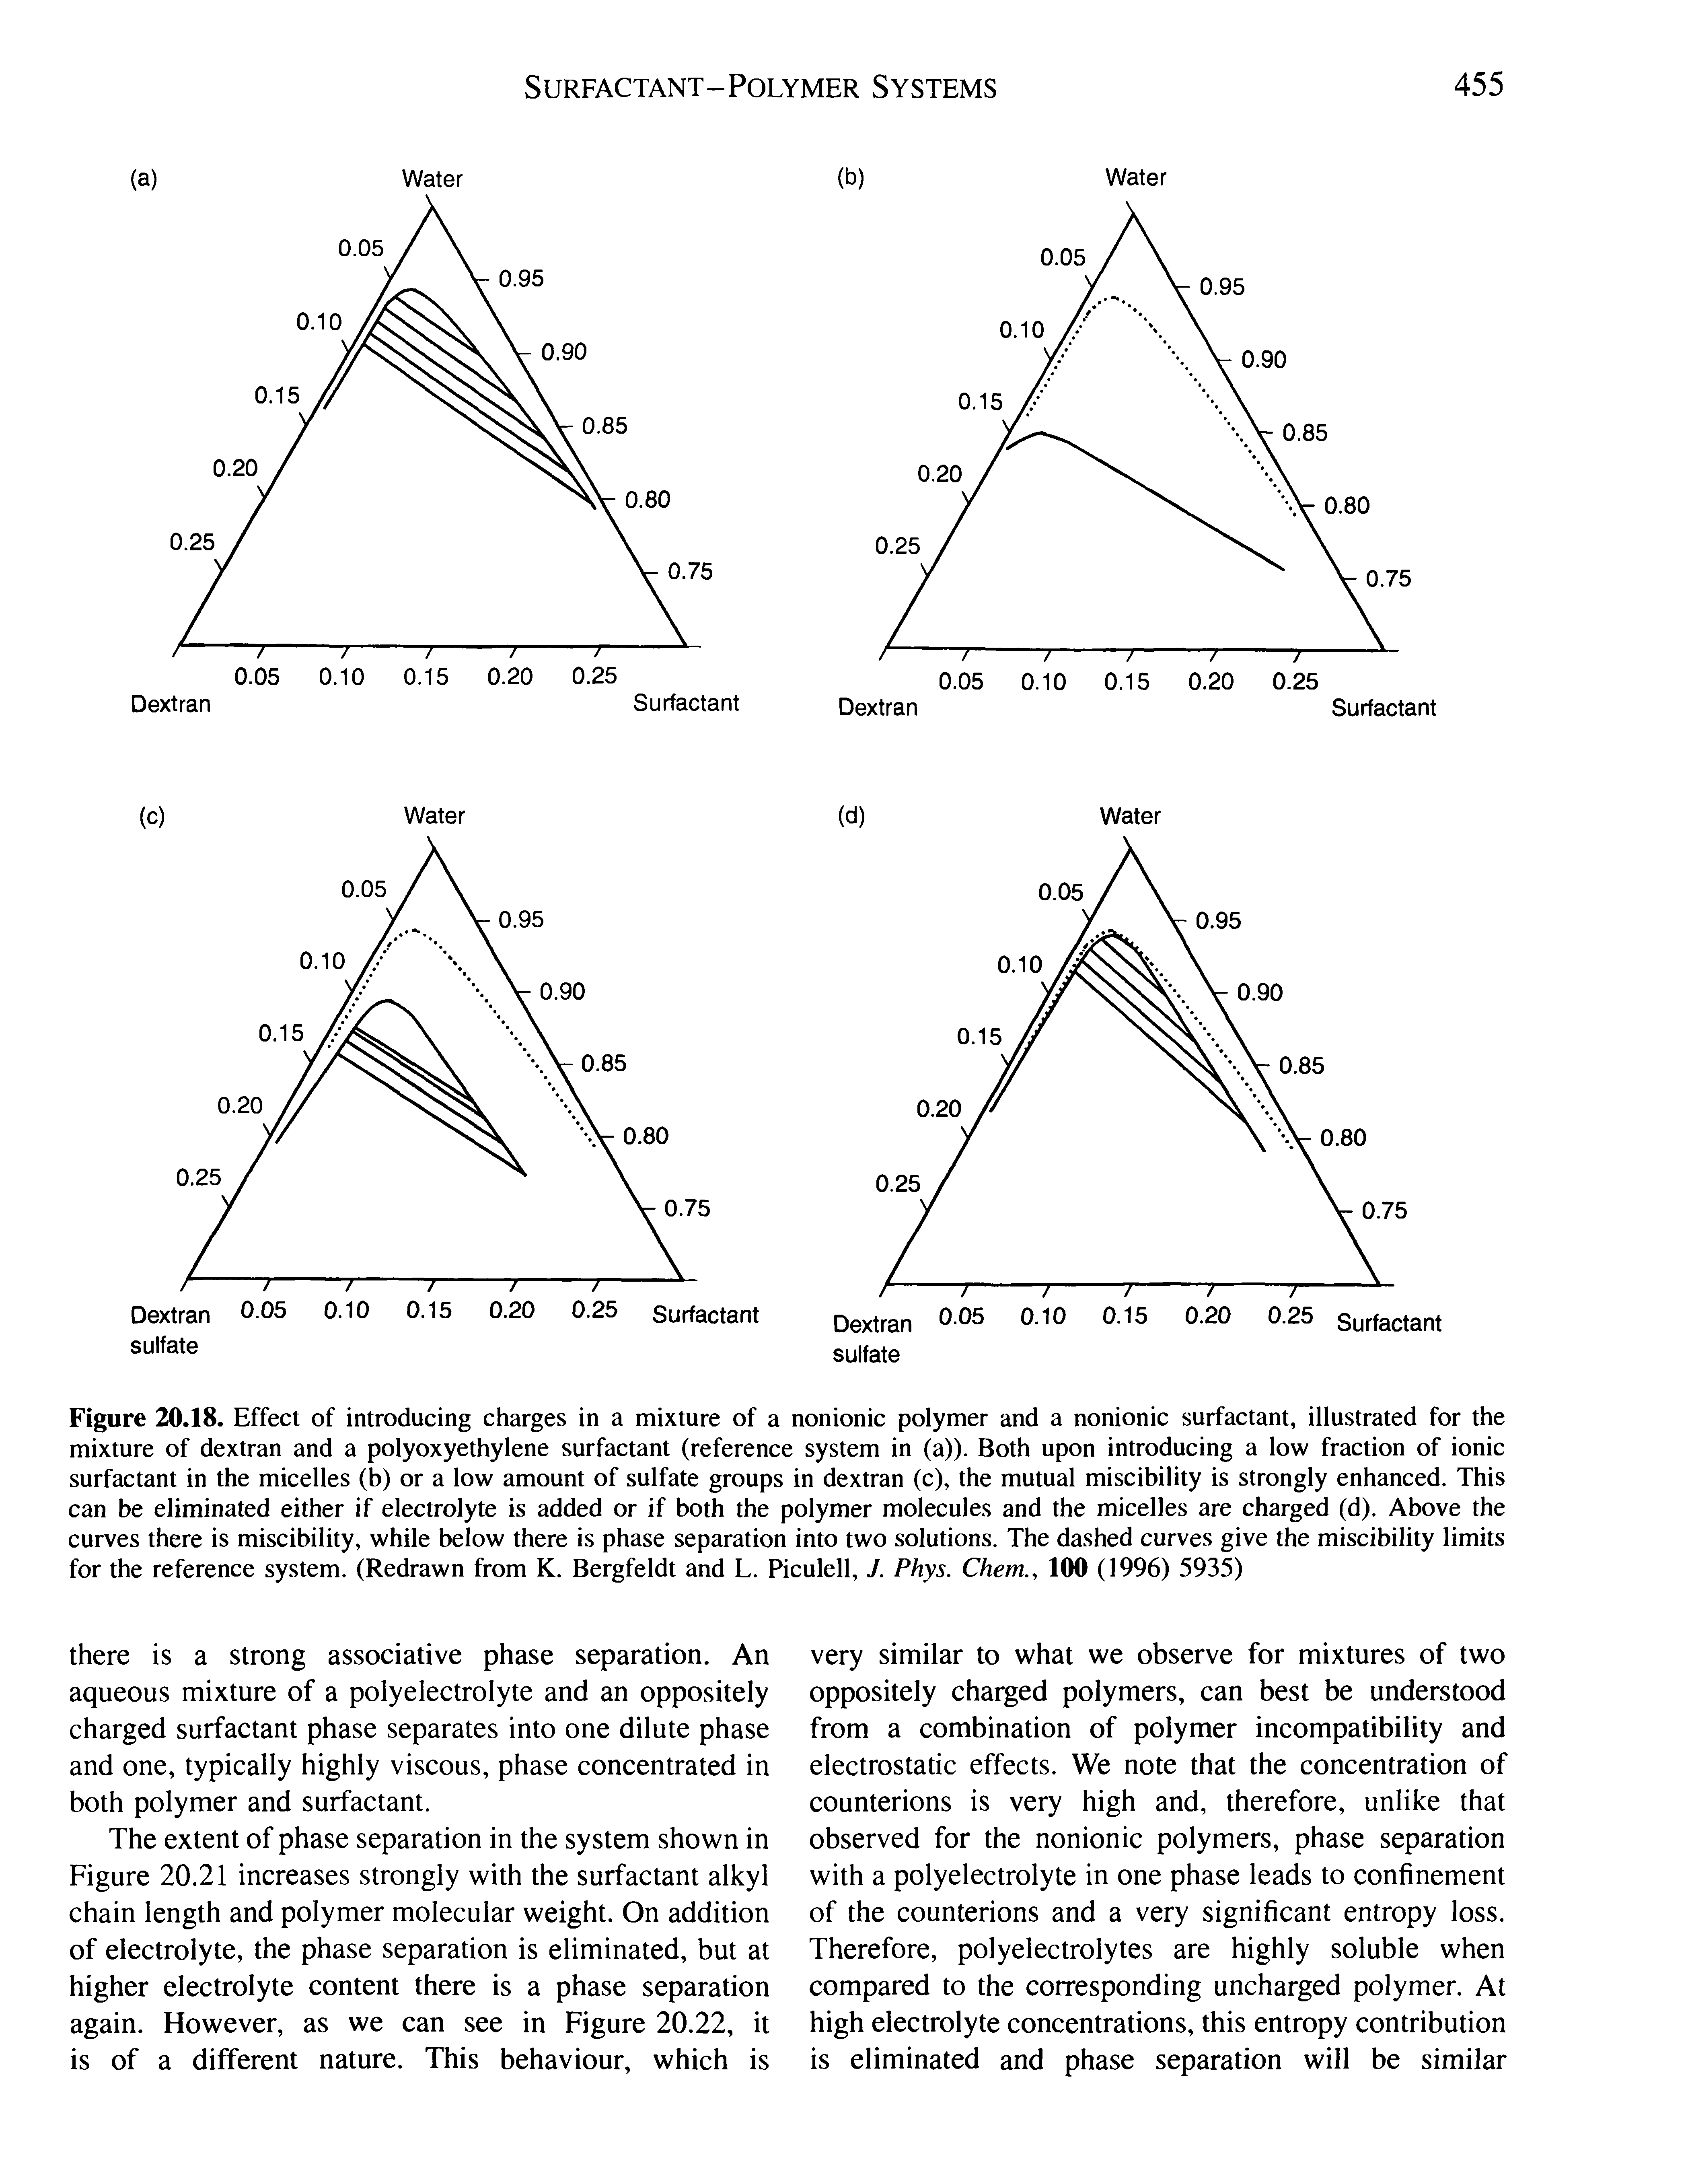 Figure 20.18. Effect of introducing charges in a mixture of a nonionic polymer and a nonionic surfactant, illustrated for the mixture of dextran and a polyoxyethylene surfactant (reference system in (a)). Both upon introducing a low fraction of ionic surfactant in the micelles (b) or a low amount of sulfate groups in dextran (c), the mutual miscibility is strongly enhanced. This can be eliminated either if electrolyte is added or if both the polymer molecules and the micelles are charged (d). Above the curves there is miscibility, while below there is phase separation into two solutions. The dashed curves give the miscibility limits for the reference system. (Redrawn from K. Bergfeldt and L. Piculell, J. Phys. Chem., 100 (1996) 5935)...